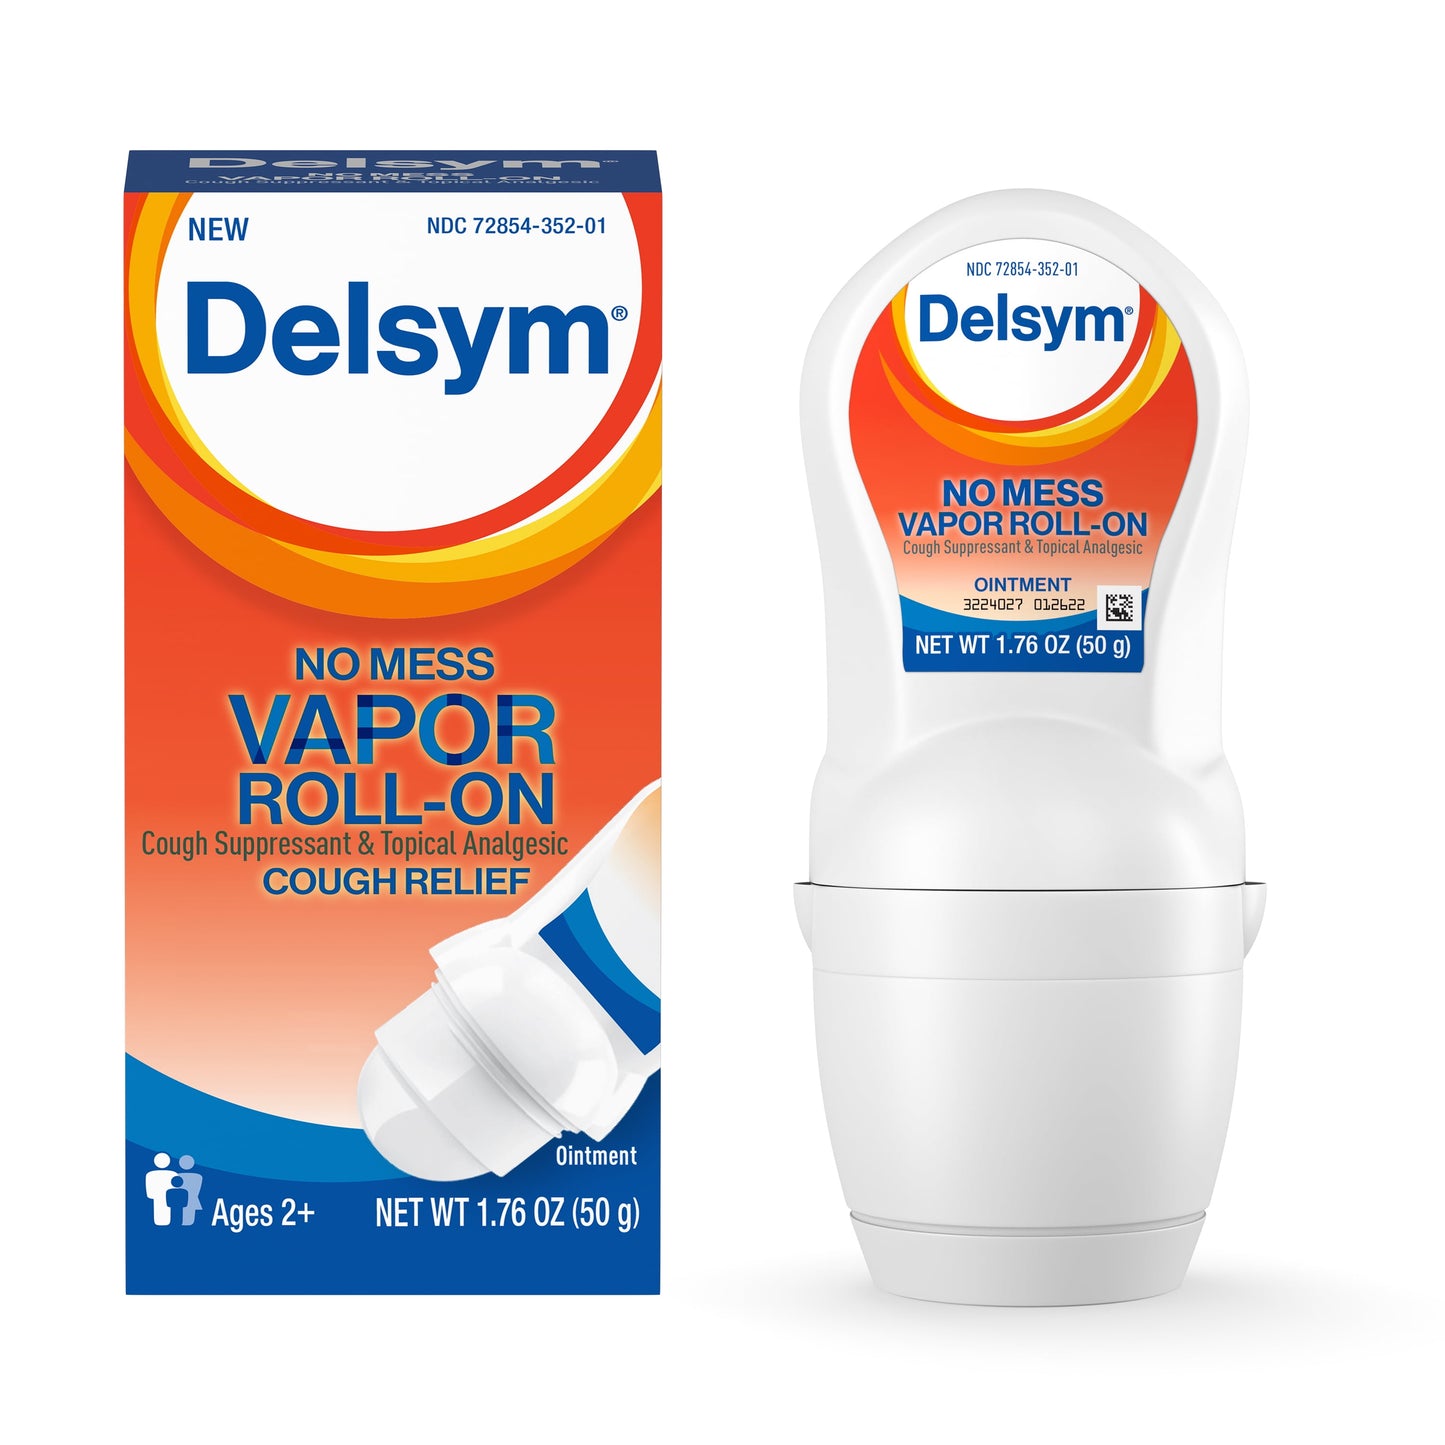 Delsym No Mess Vapor Roll-On Cough Suppressant & Topical Analgesic 1.76 oz with Camphor, Eucalyptus Oil,  Menthol, Adults & Kids, Maximum Strength